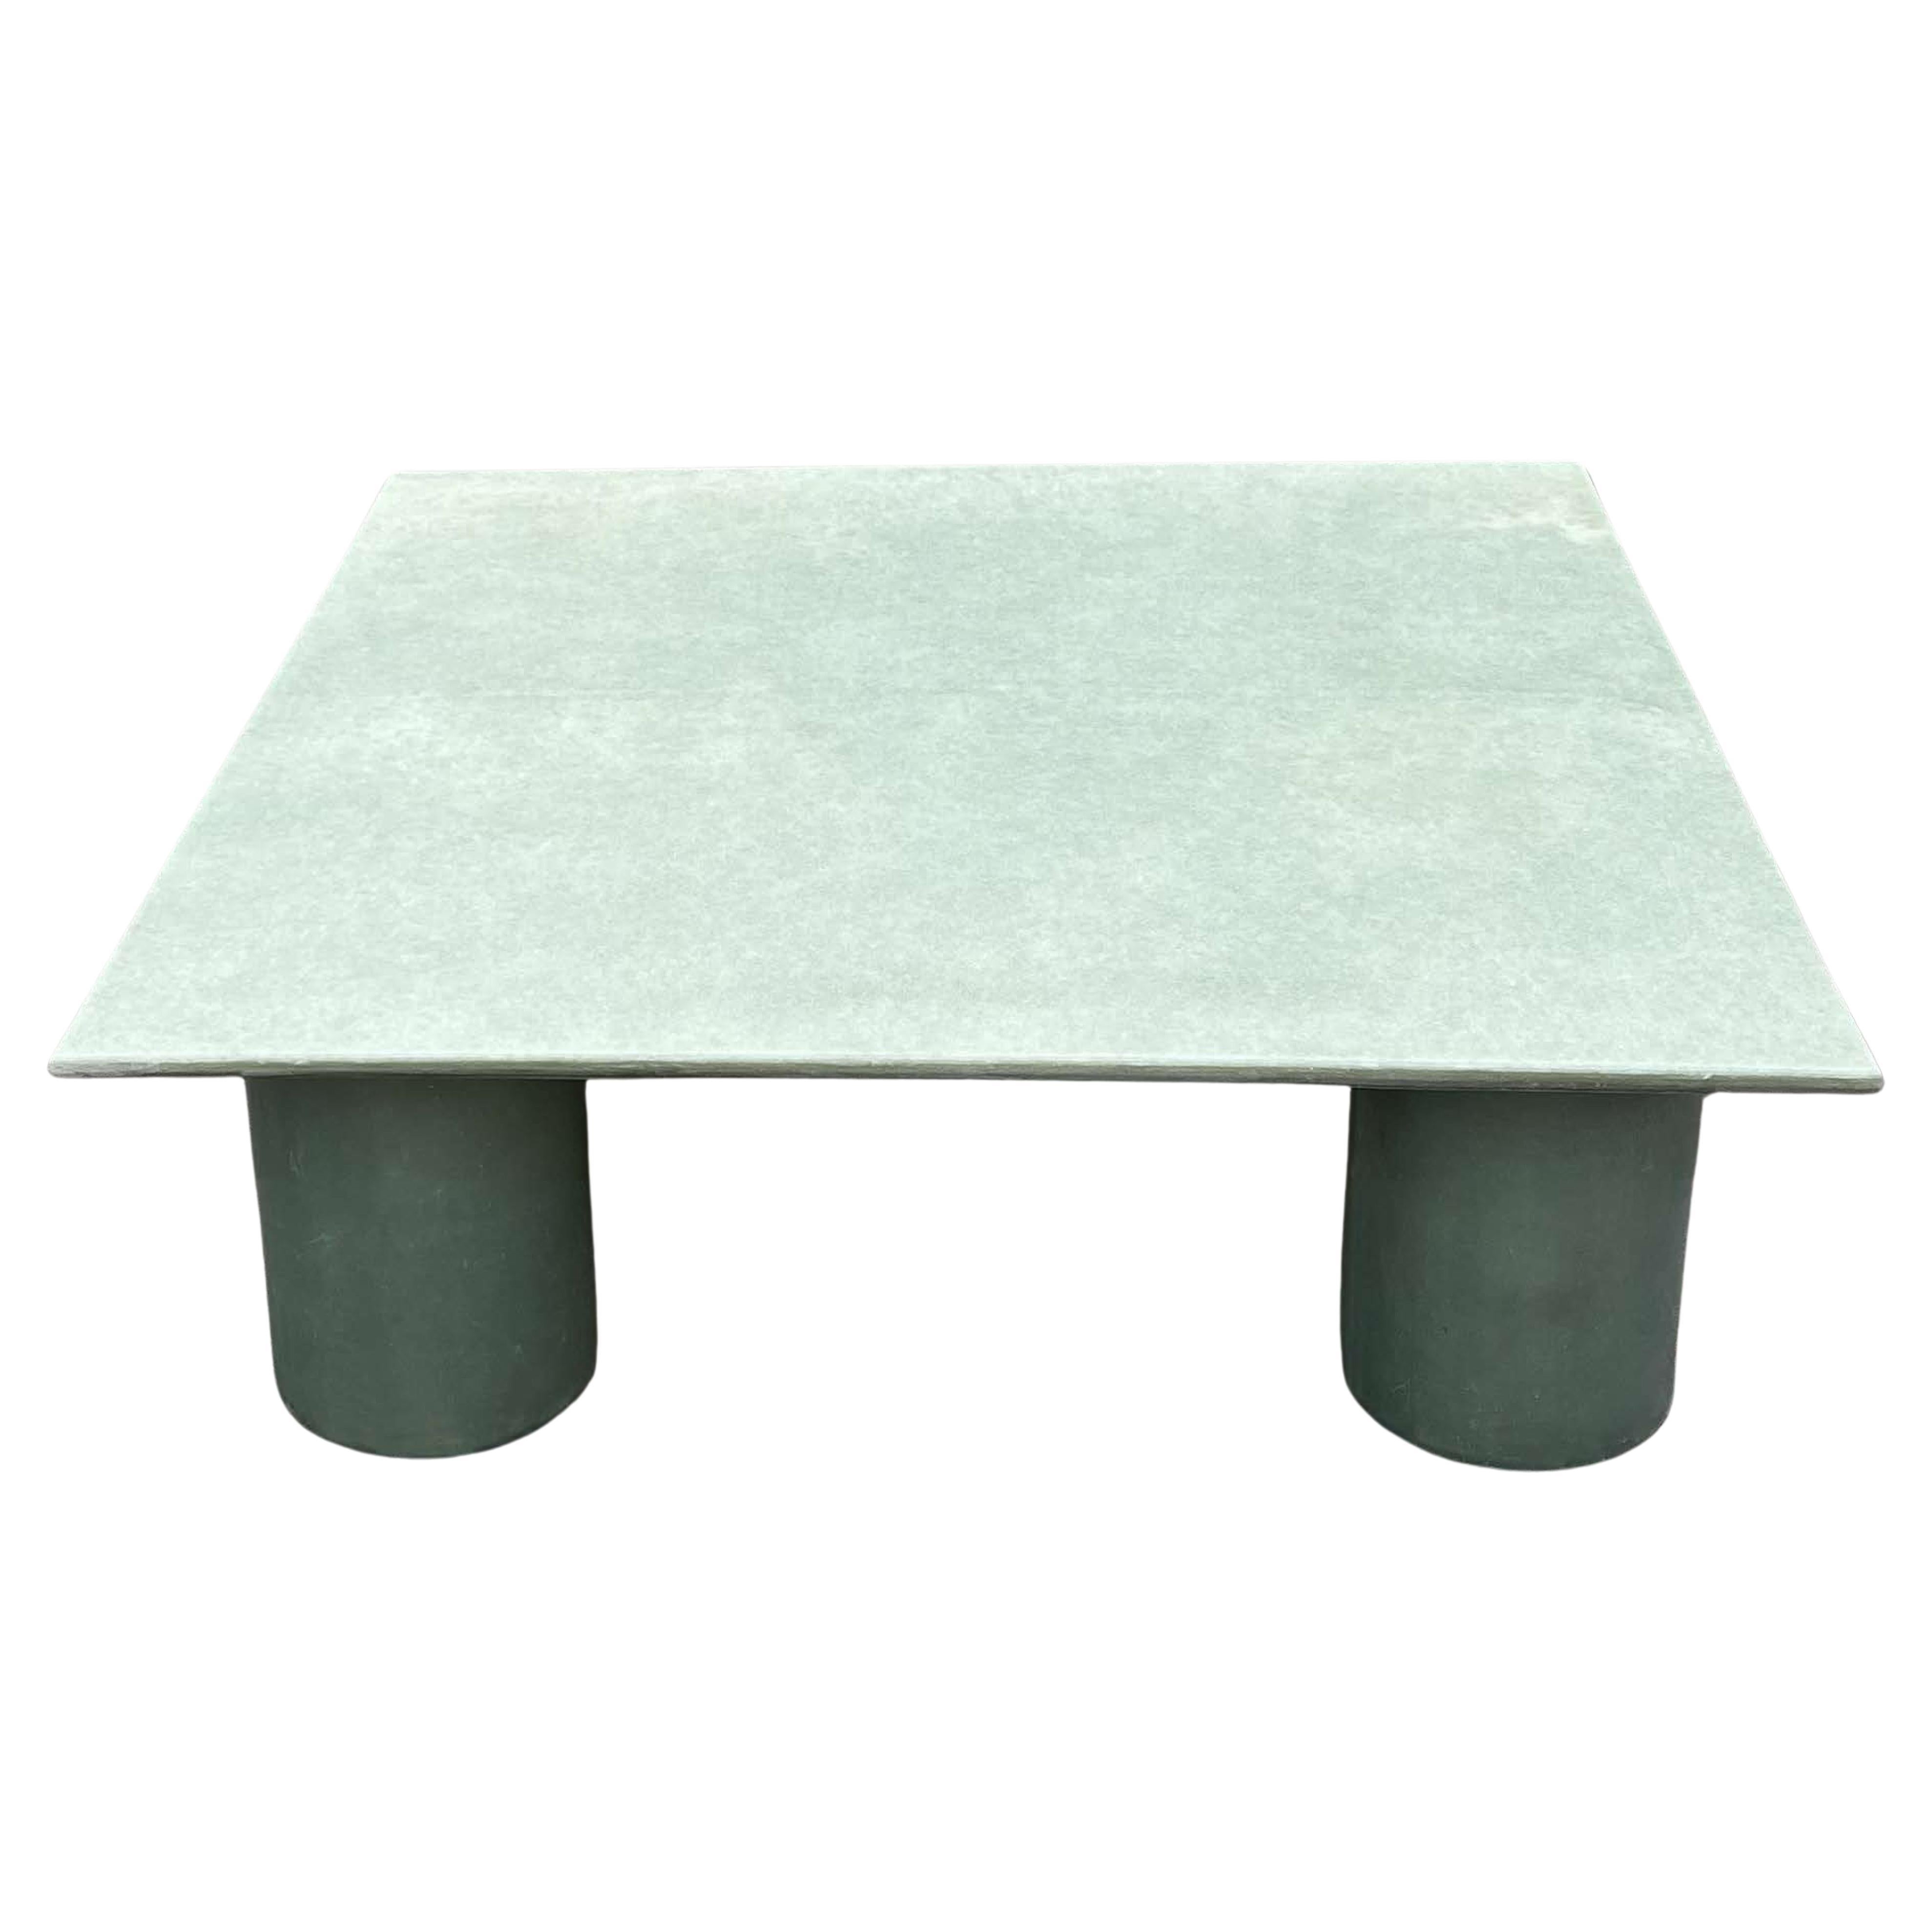 Contemporary Light Green Fiberglass Square Table 120 cm Large Coffee Table For Sale